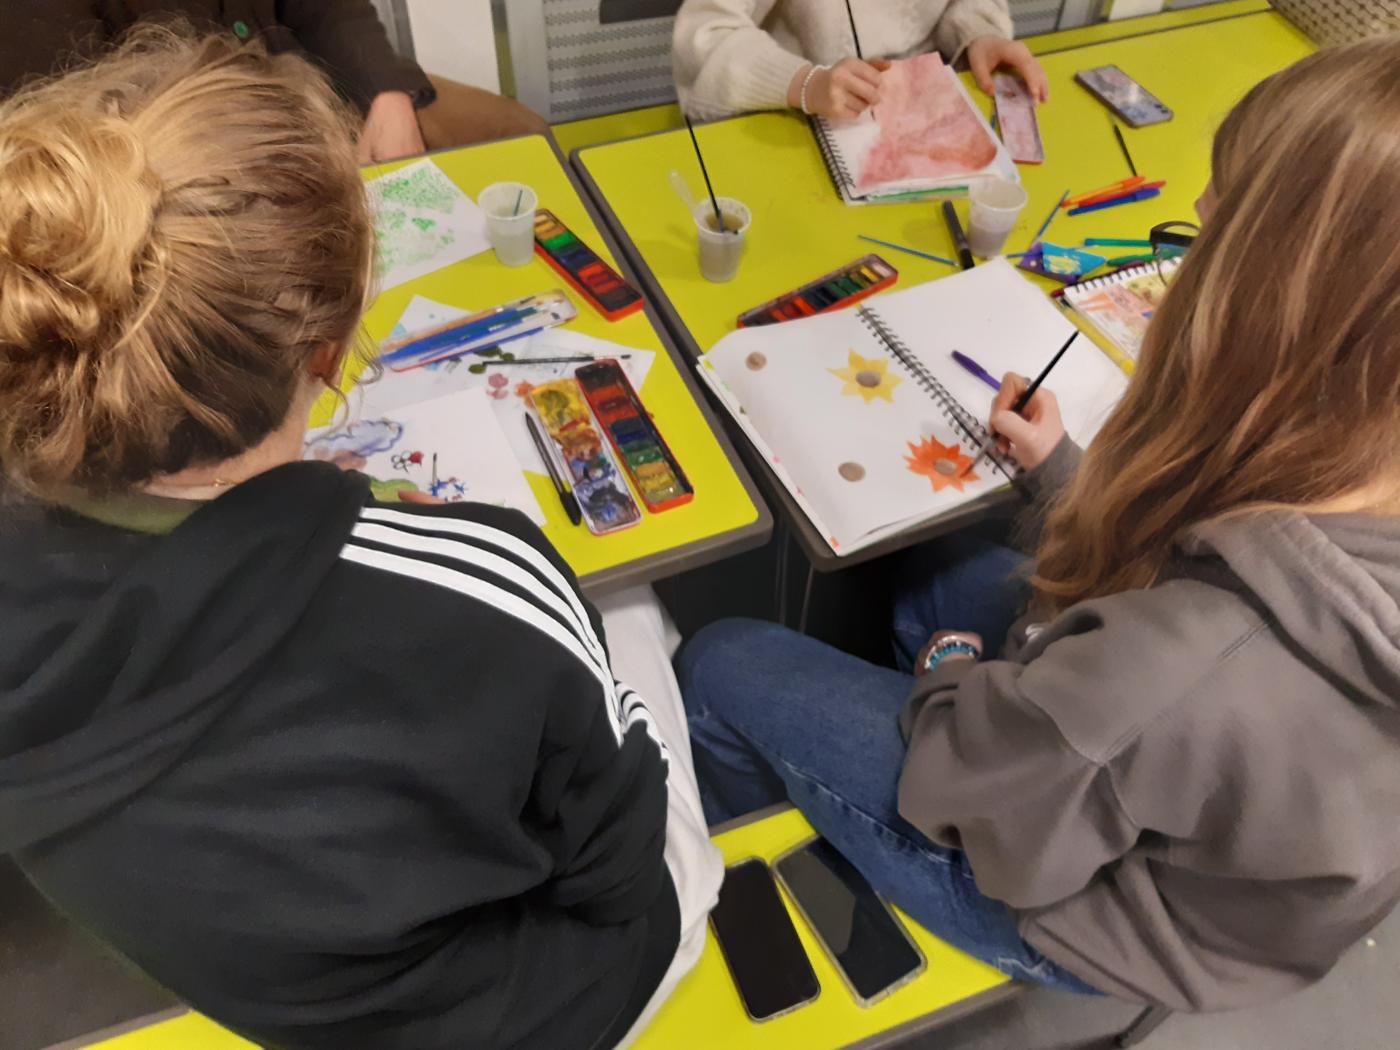 An image showing 'Saturday Art Club events'